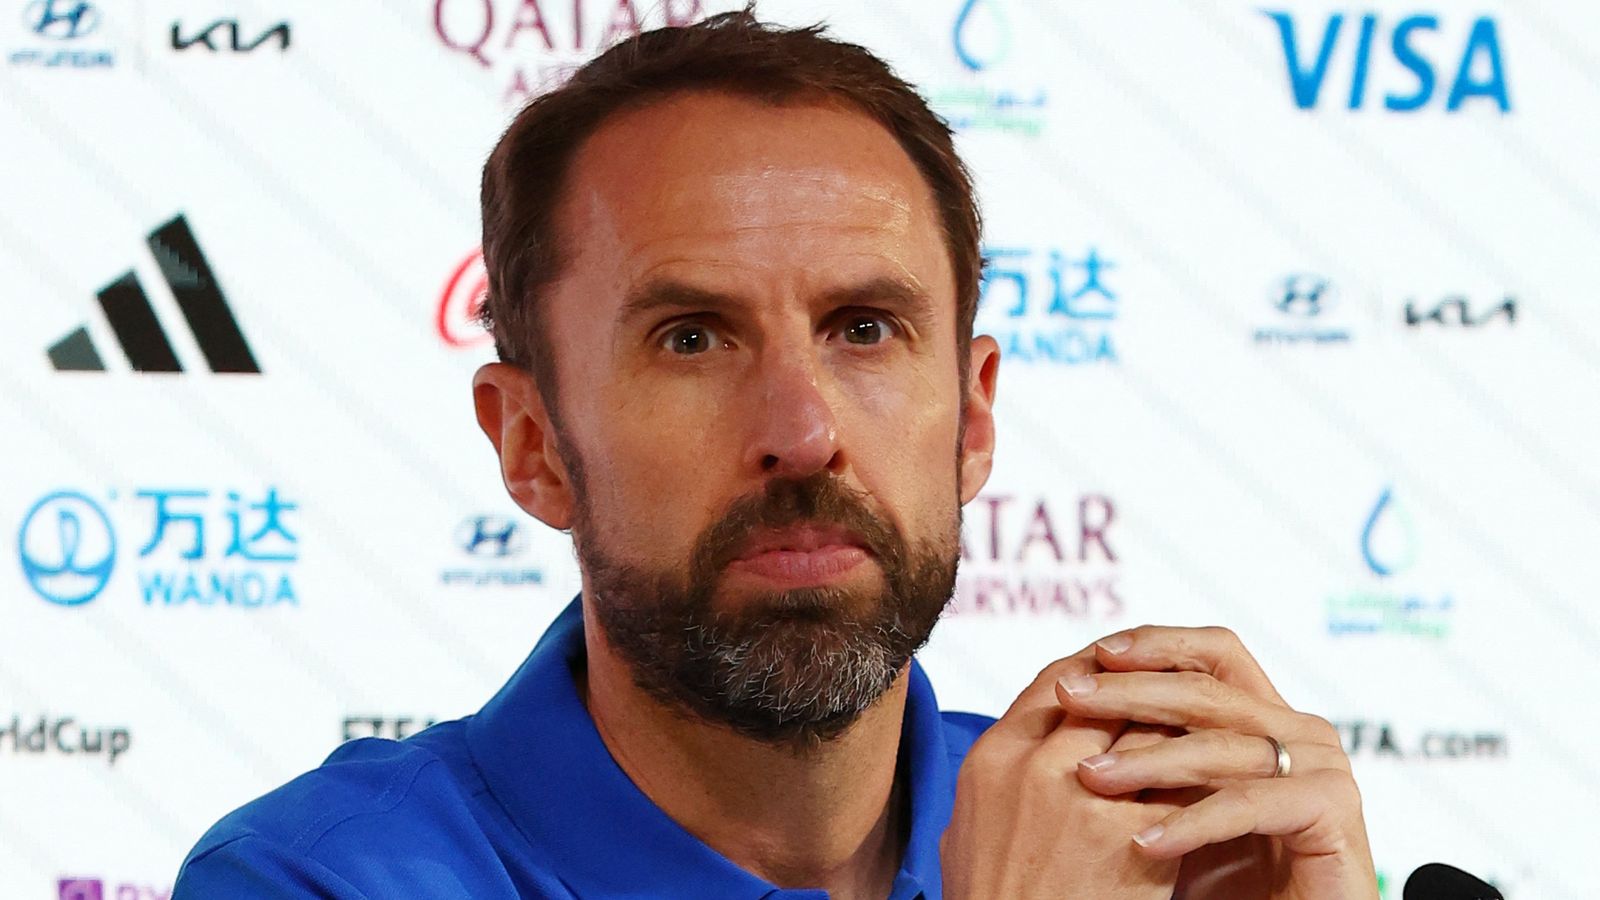 England will take the knee in Qatar, Gareth Southgate says